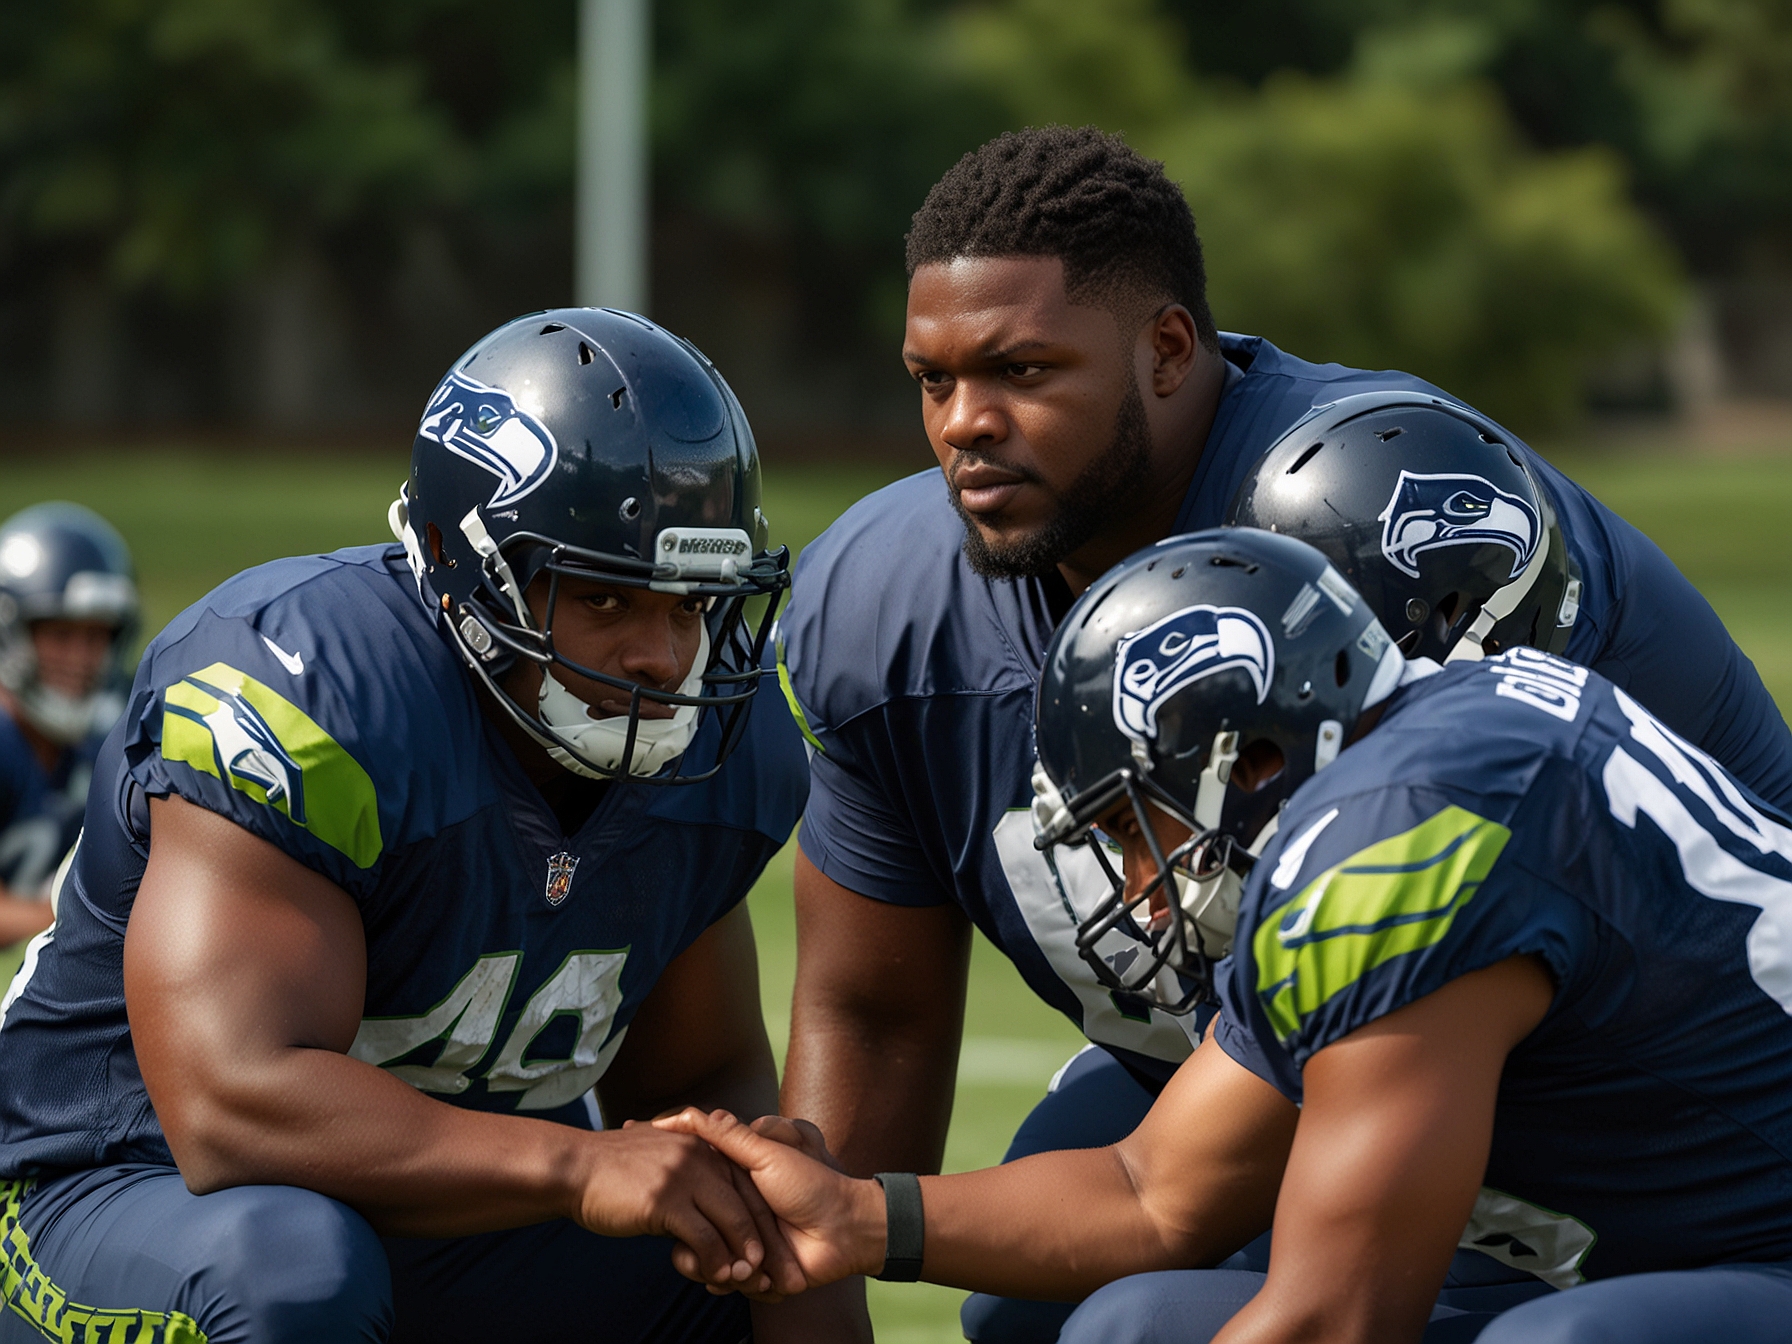 Laken Tomlinson, donning his Seattle Seahawks uniform, is seen mentoring younger linemen during a rigorous training session on the practice field, showcasing his leadership.